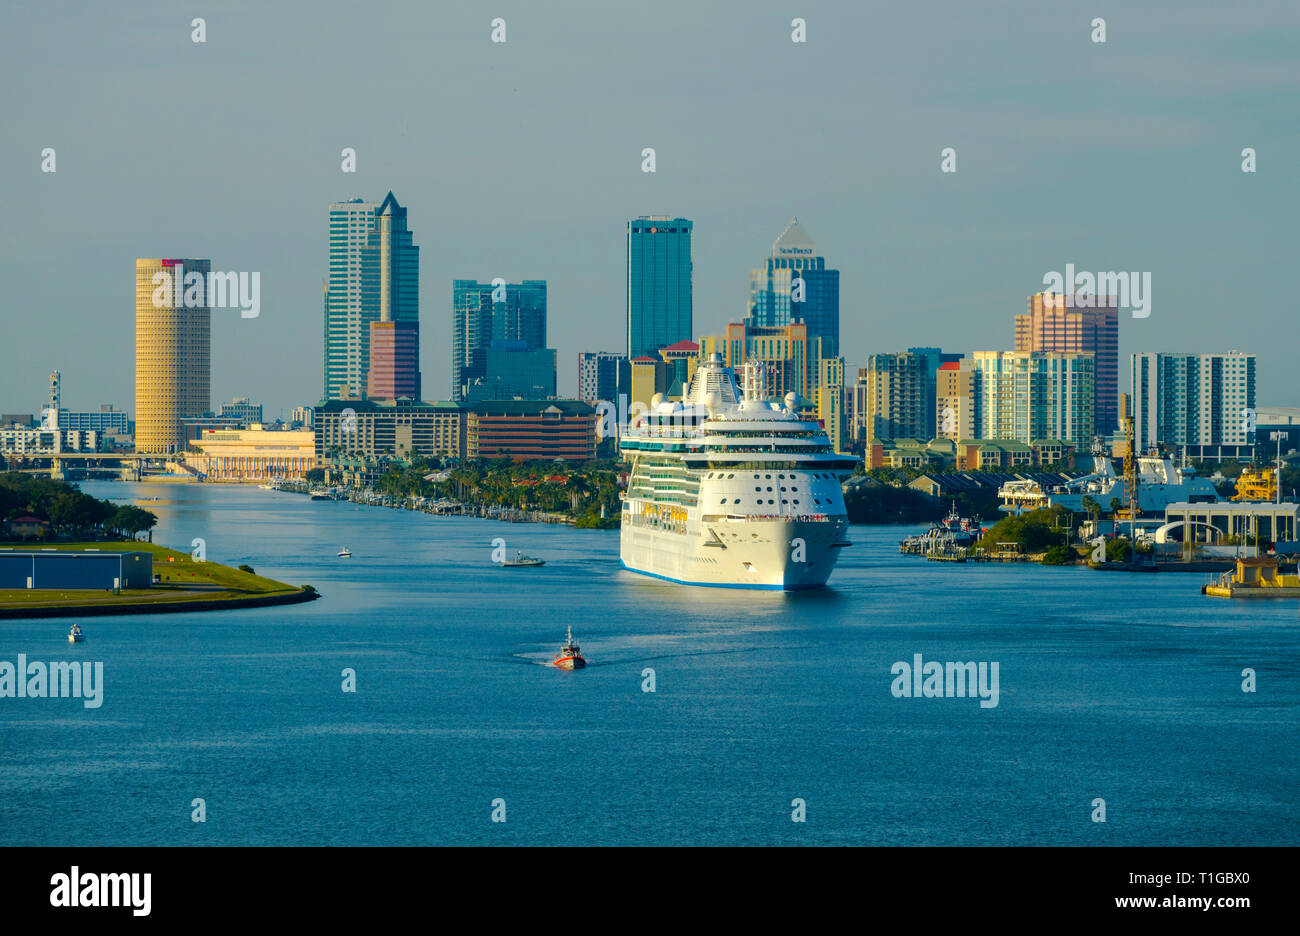 Tampa Florida skyline from the deck of a departing cruise ship on the Hillsbourough River in Tampa Bay with cruise ship Royal Caribbean Brilliance of Stock Photo